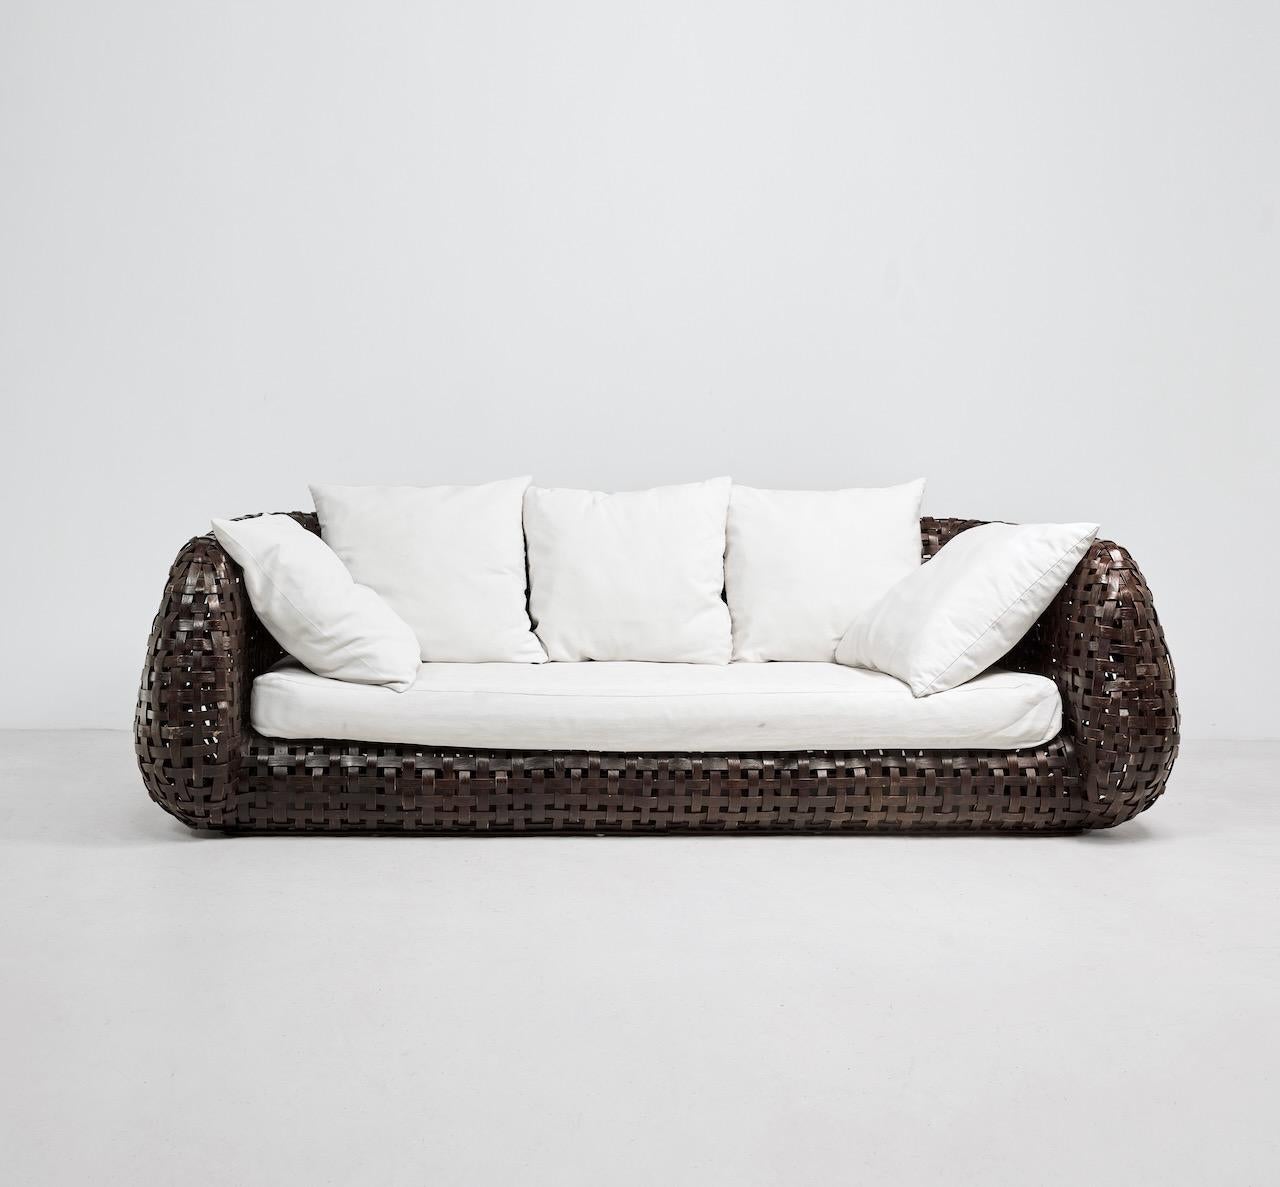 Late 20th Century sofa composed from woven rattan on a bamboo frame. Accompanied by cushion upholstered in an off white cotton fabric. 


Dimensions (cm, approx): 
Height: 70
Width: 228
Depth: 111
